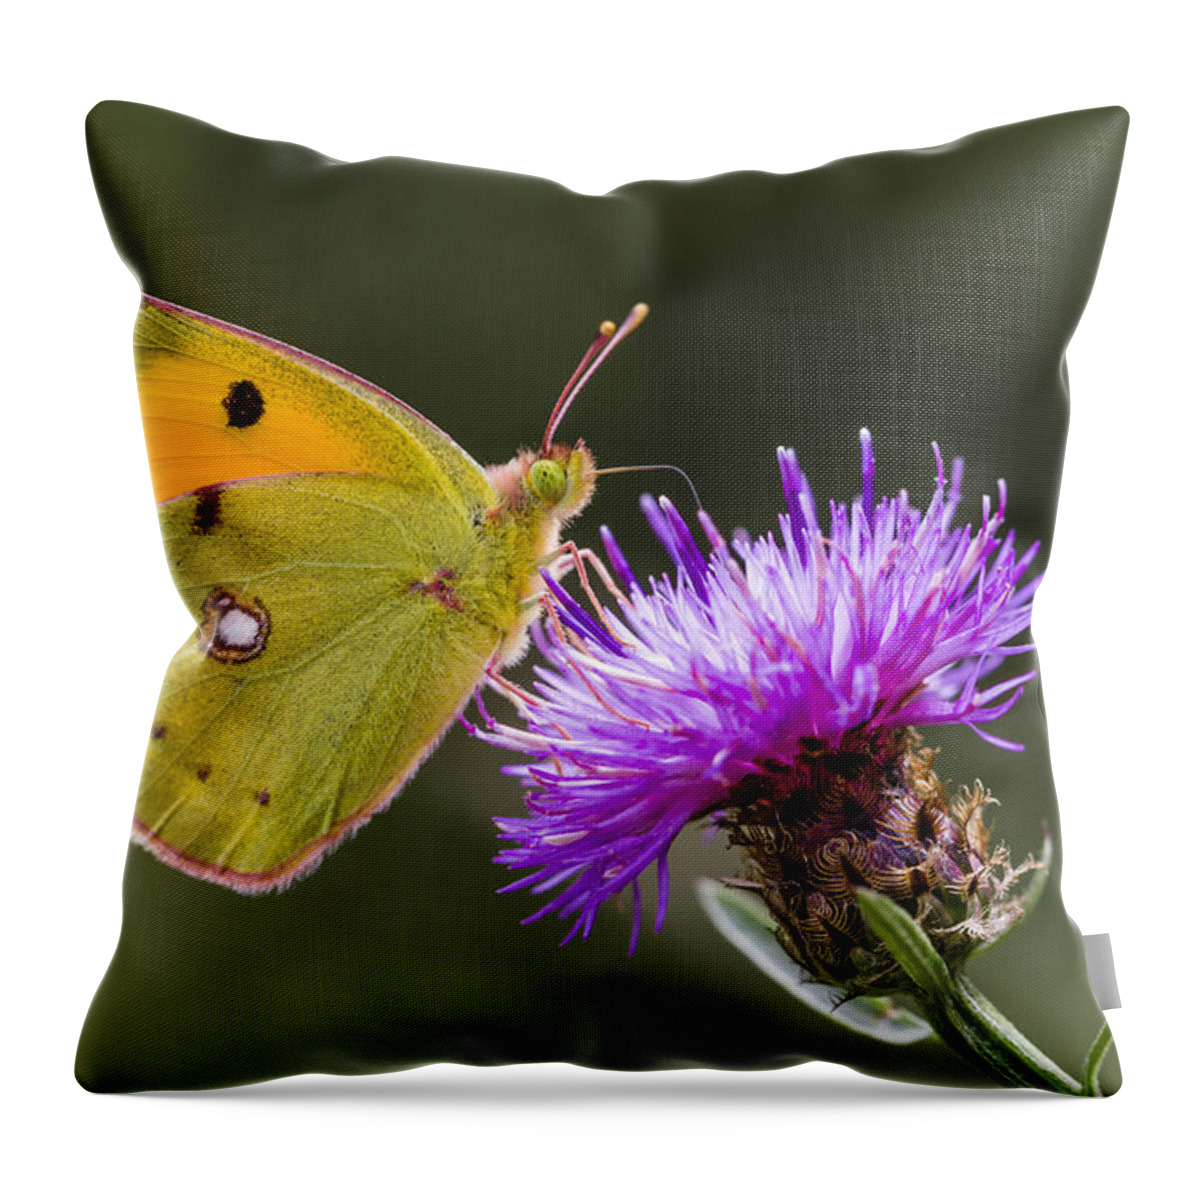 Nis Throw Pillow featuring the photograph Clouded Yellow Butterfly Feeding by Alex Huizinga